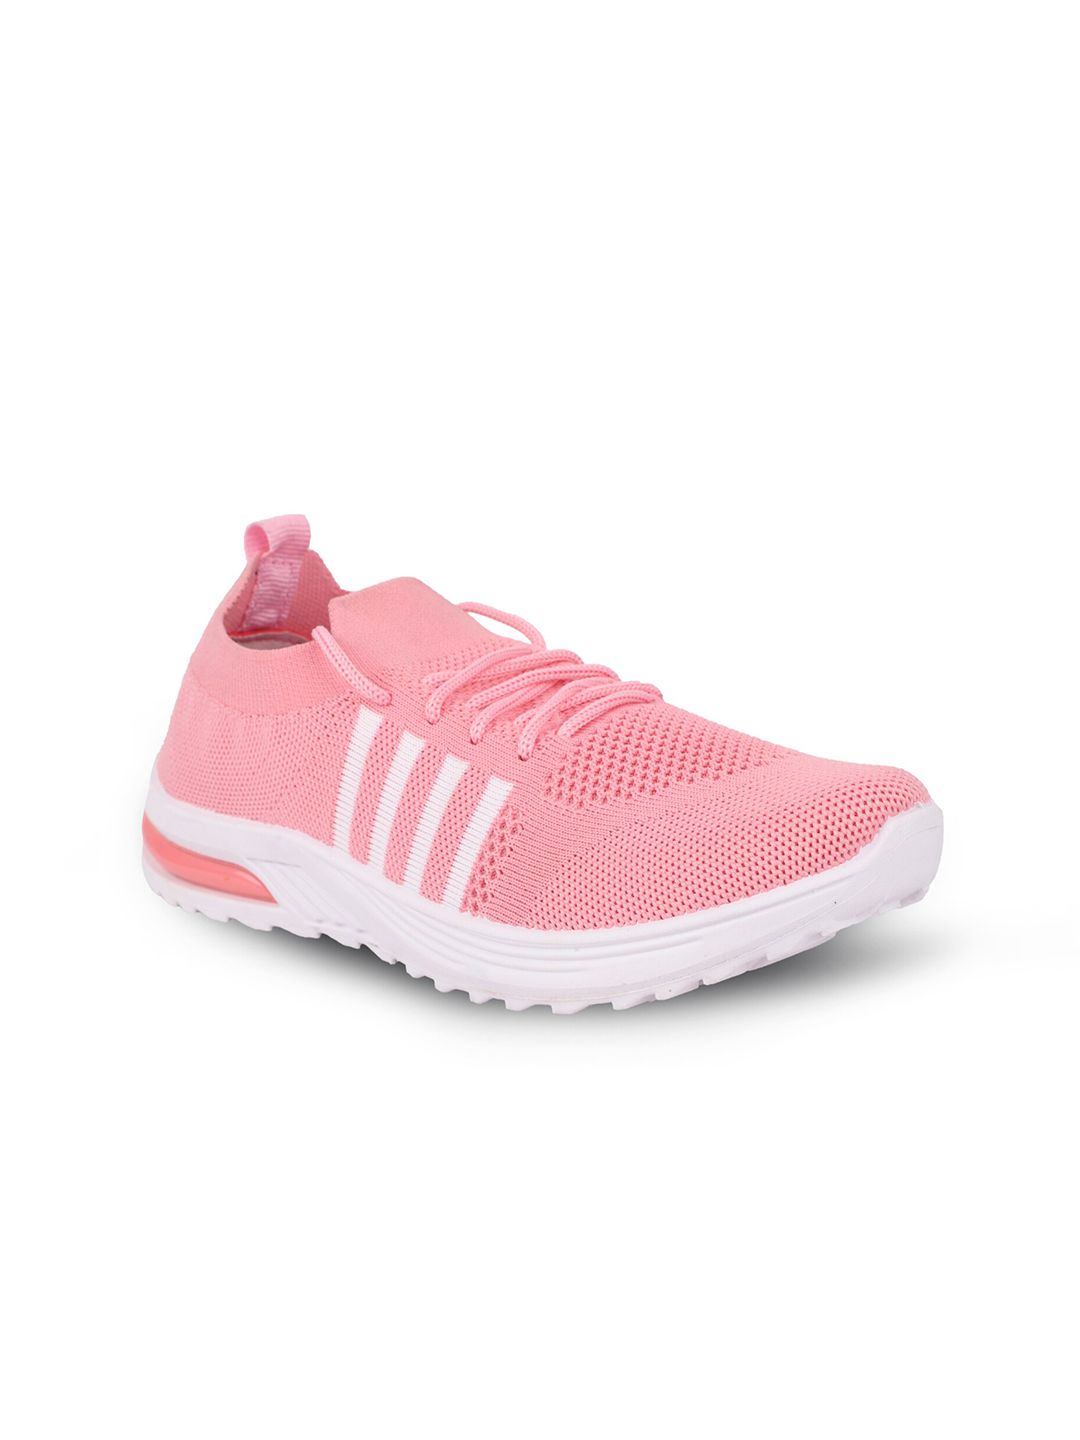 FABBMATE Women Pink Walking Non-Marking Shoes Price in India